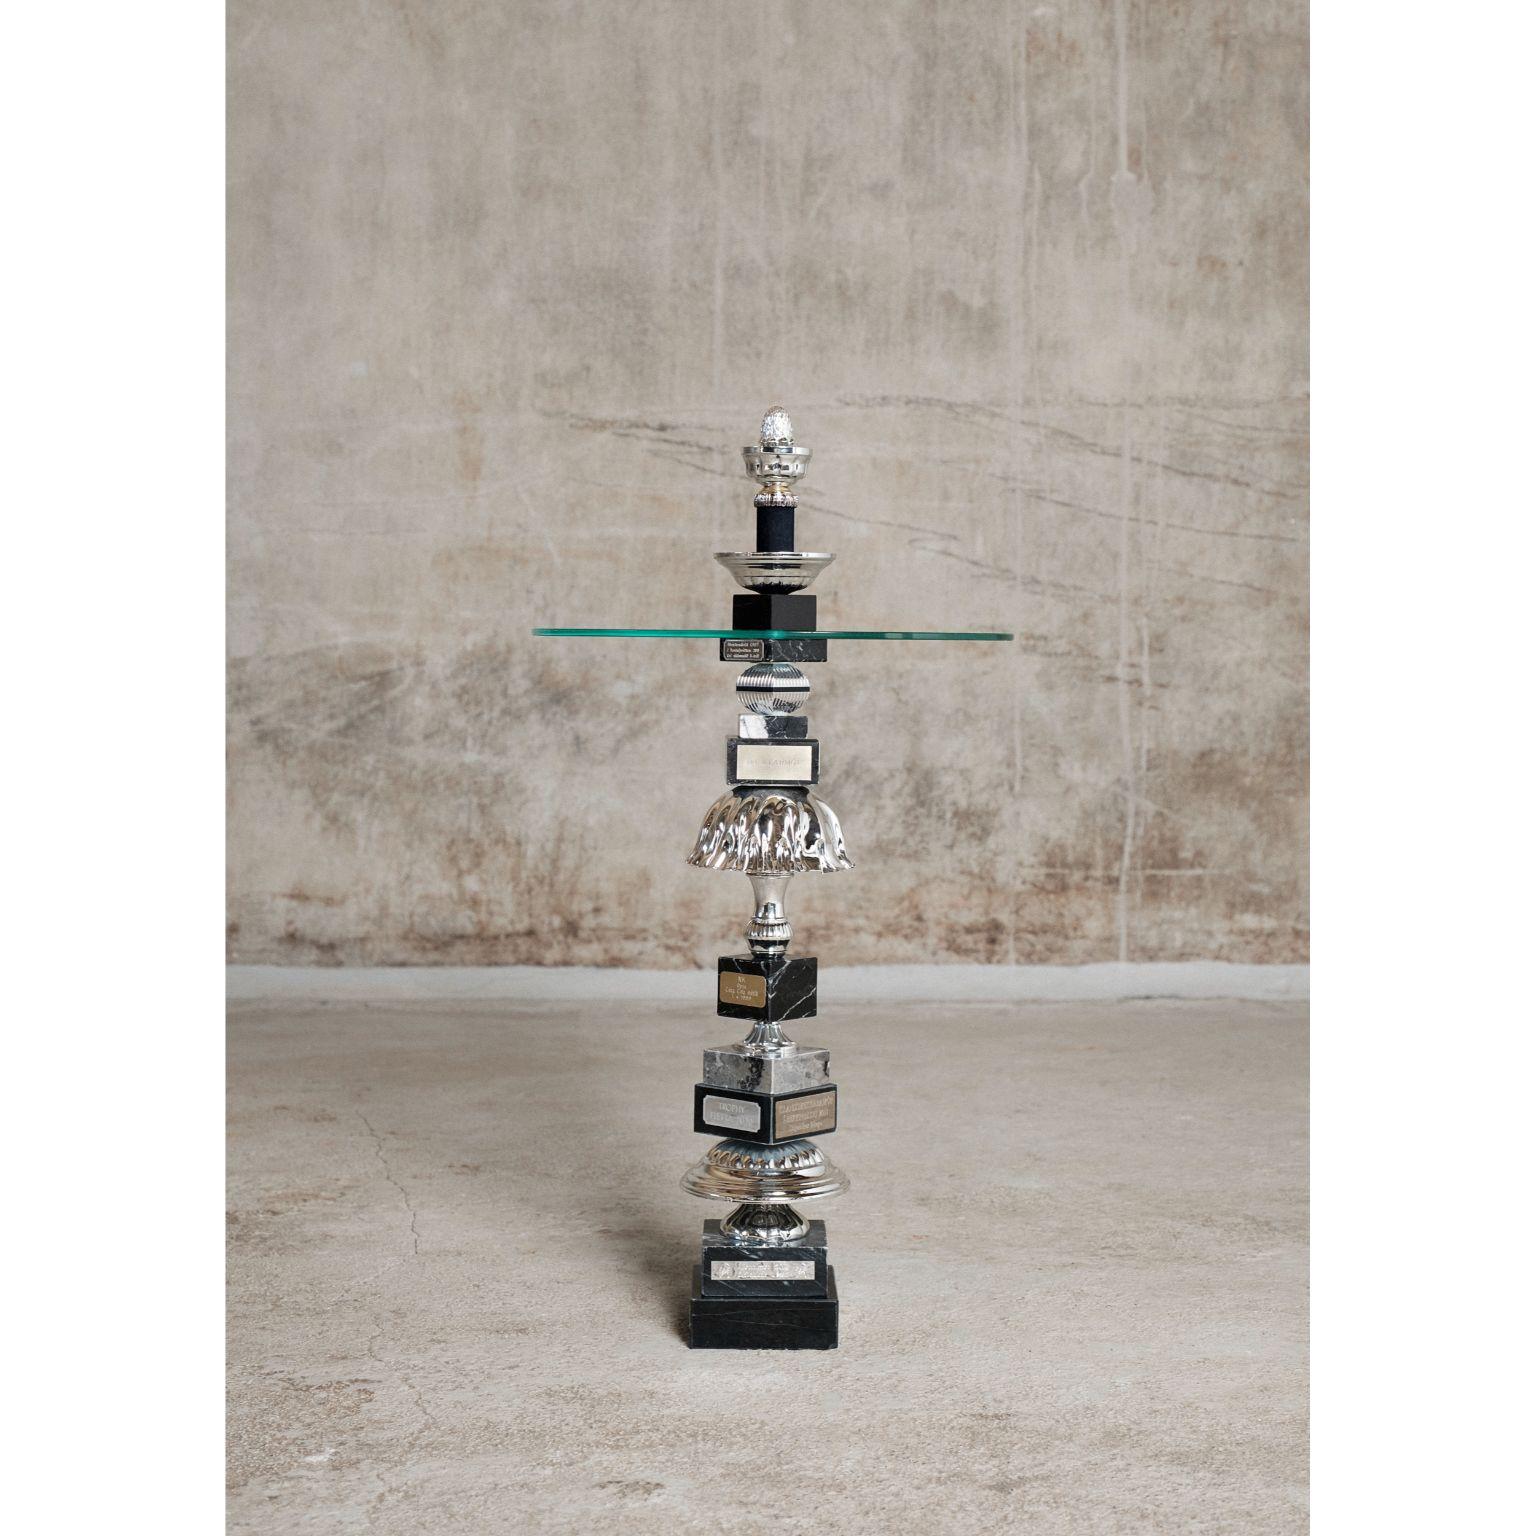 The silver pine cone table by Flétta
Dimensions: D40 x H76 cm
Materials: Black/silver/grey marble, glass.

Trophy is a collection of tables, lights, flowerpots and shelves made of old trophies collected from athletes and sports clubs in Iceland.